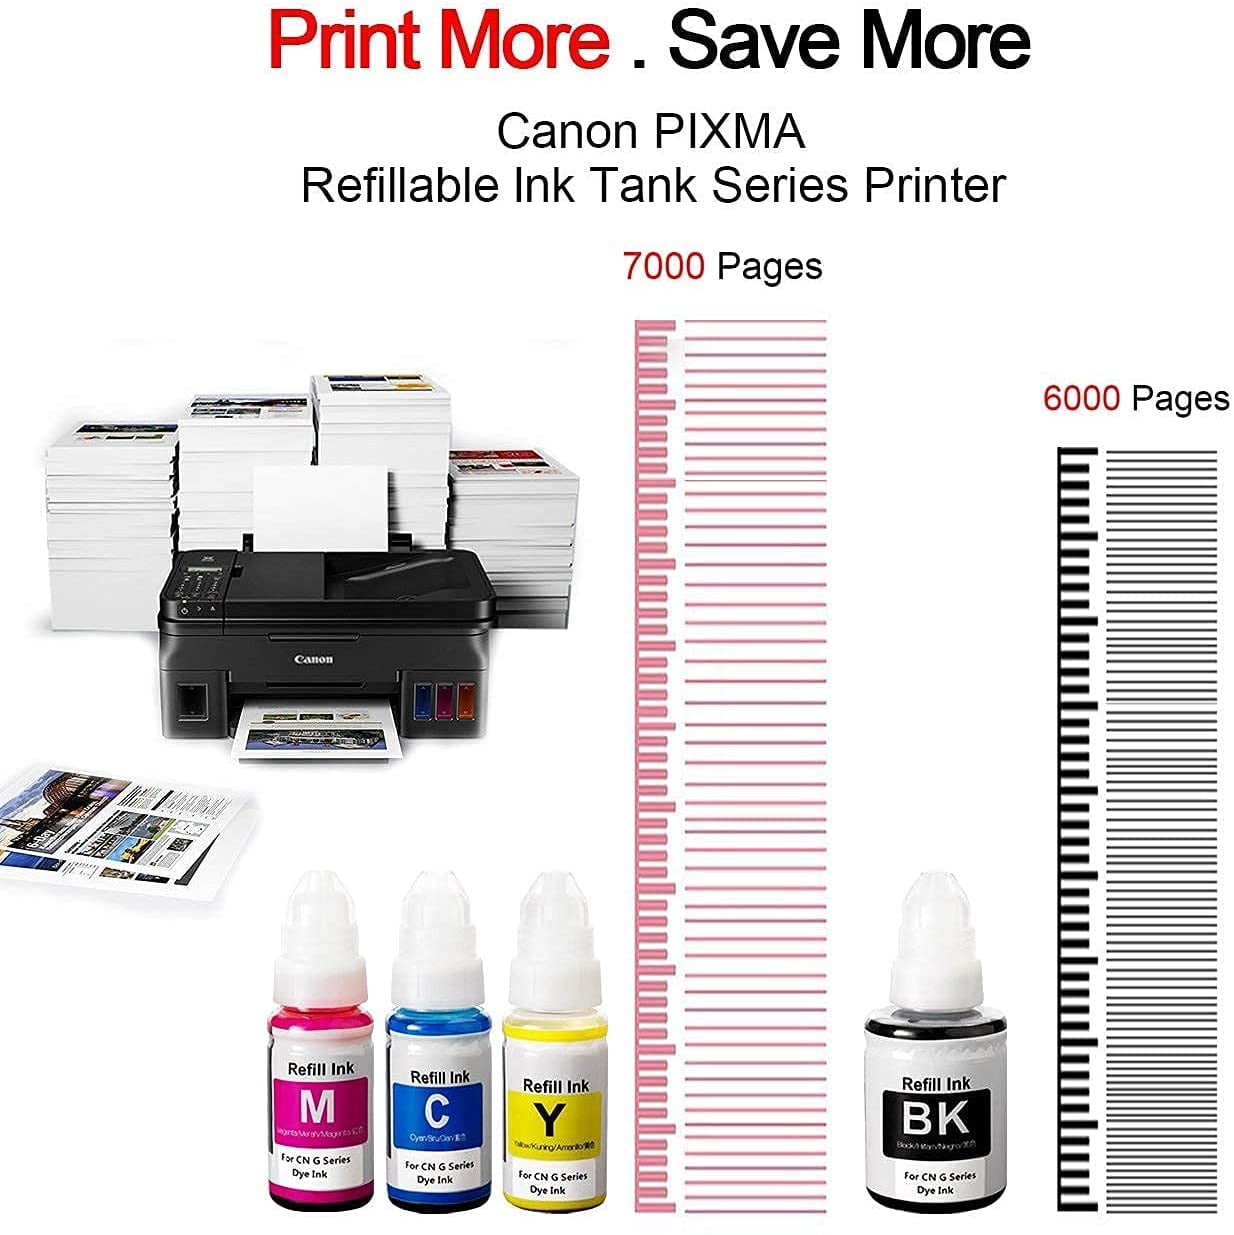 Printers Jack Epson Sublimation Ink Refill 100 mL Multipack - Black, Cyan,  Magenta, & Yellow 